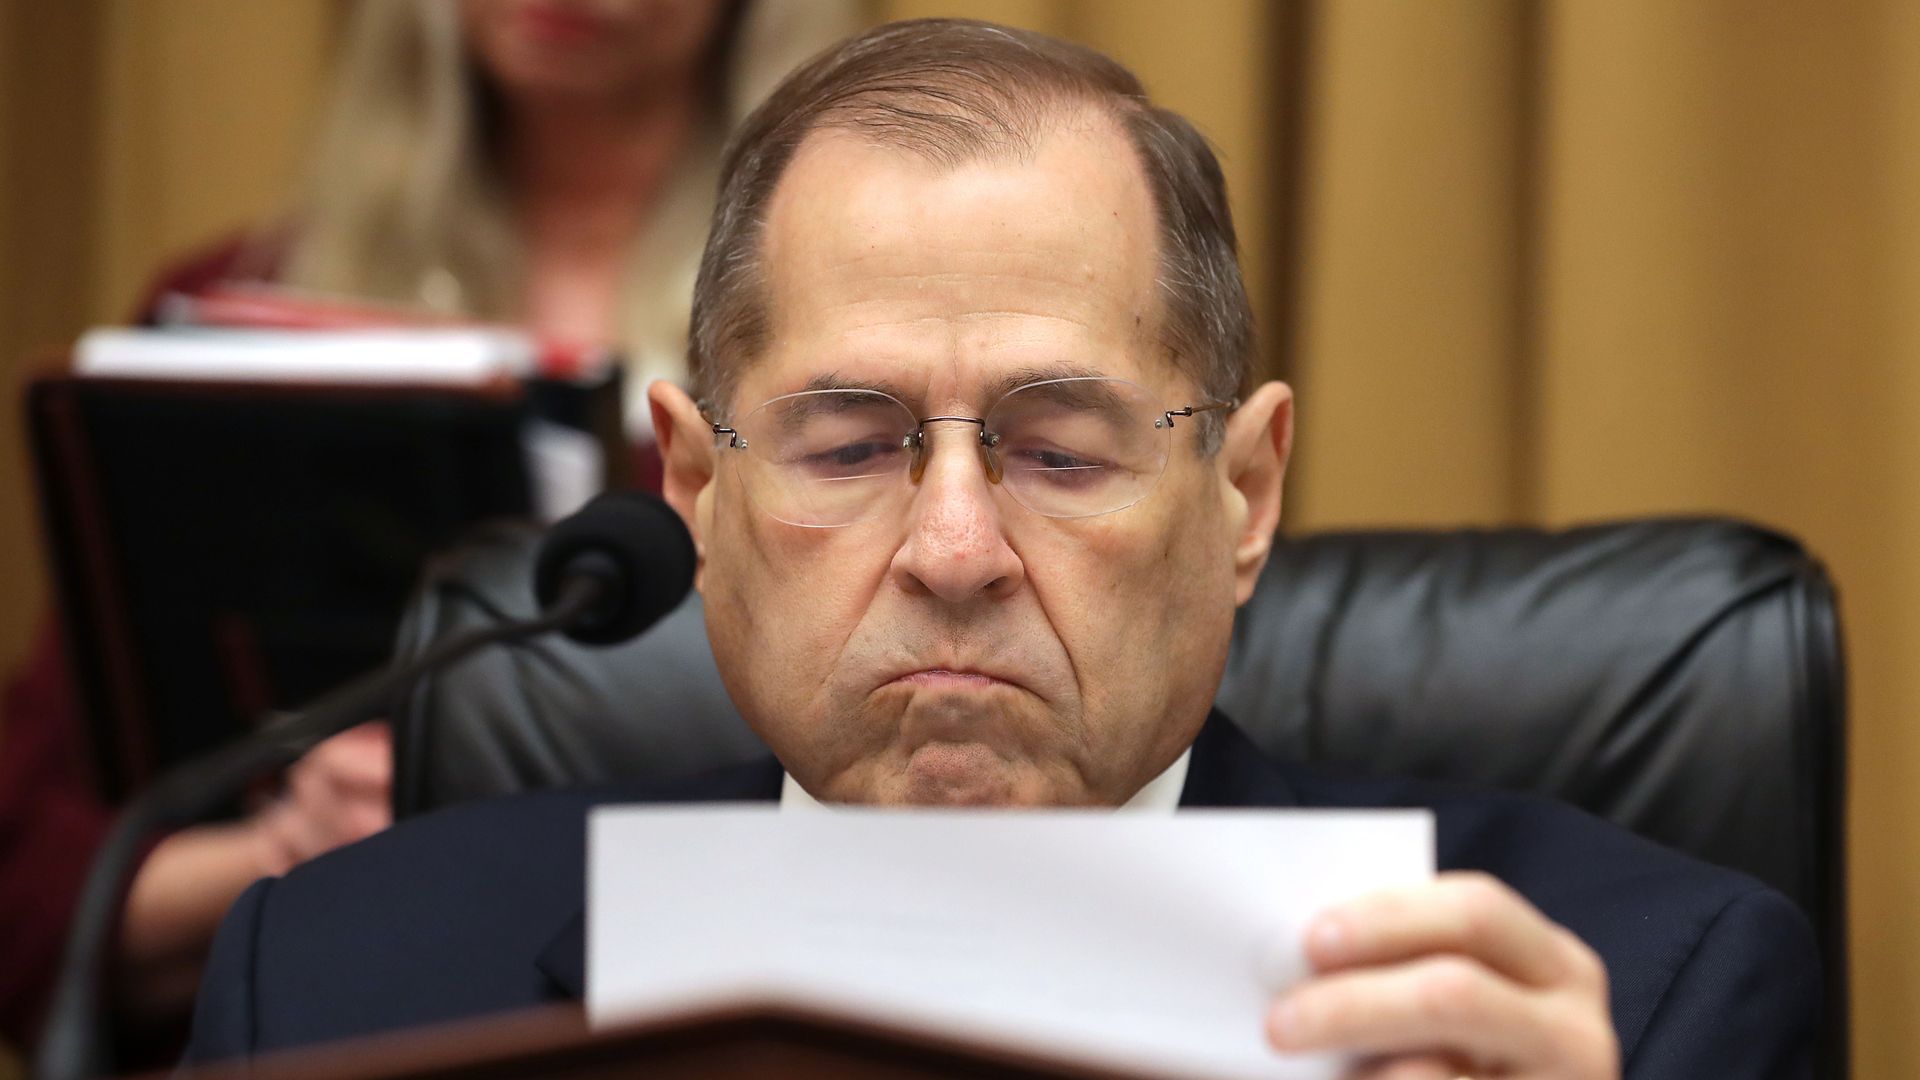 House Judiciary Committee Chairman Jerrold Nadler (D-NY) reads a news report on May 08, 2019 in Washington, DC. 